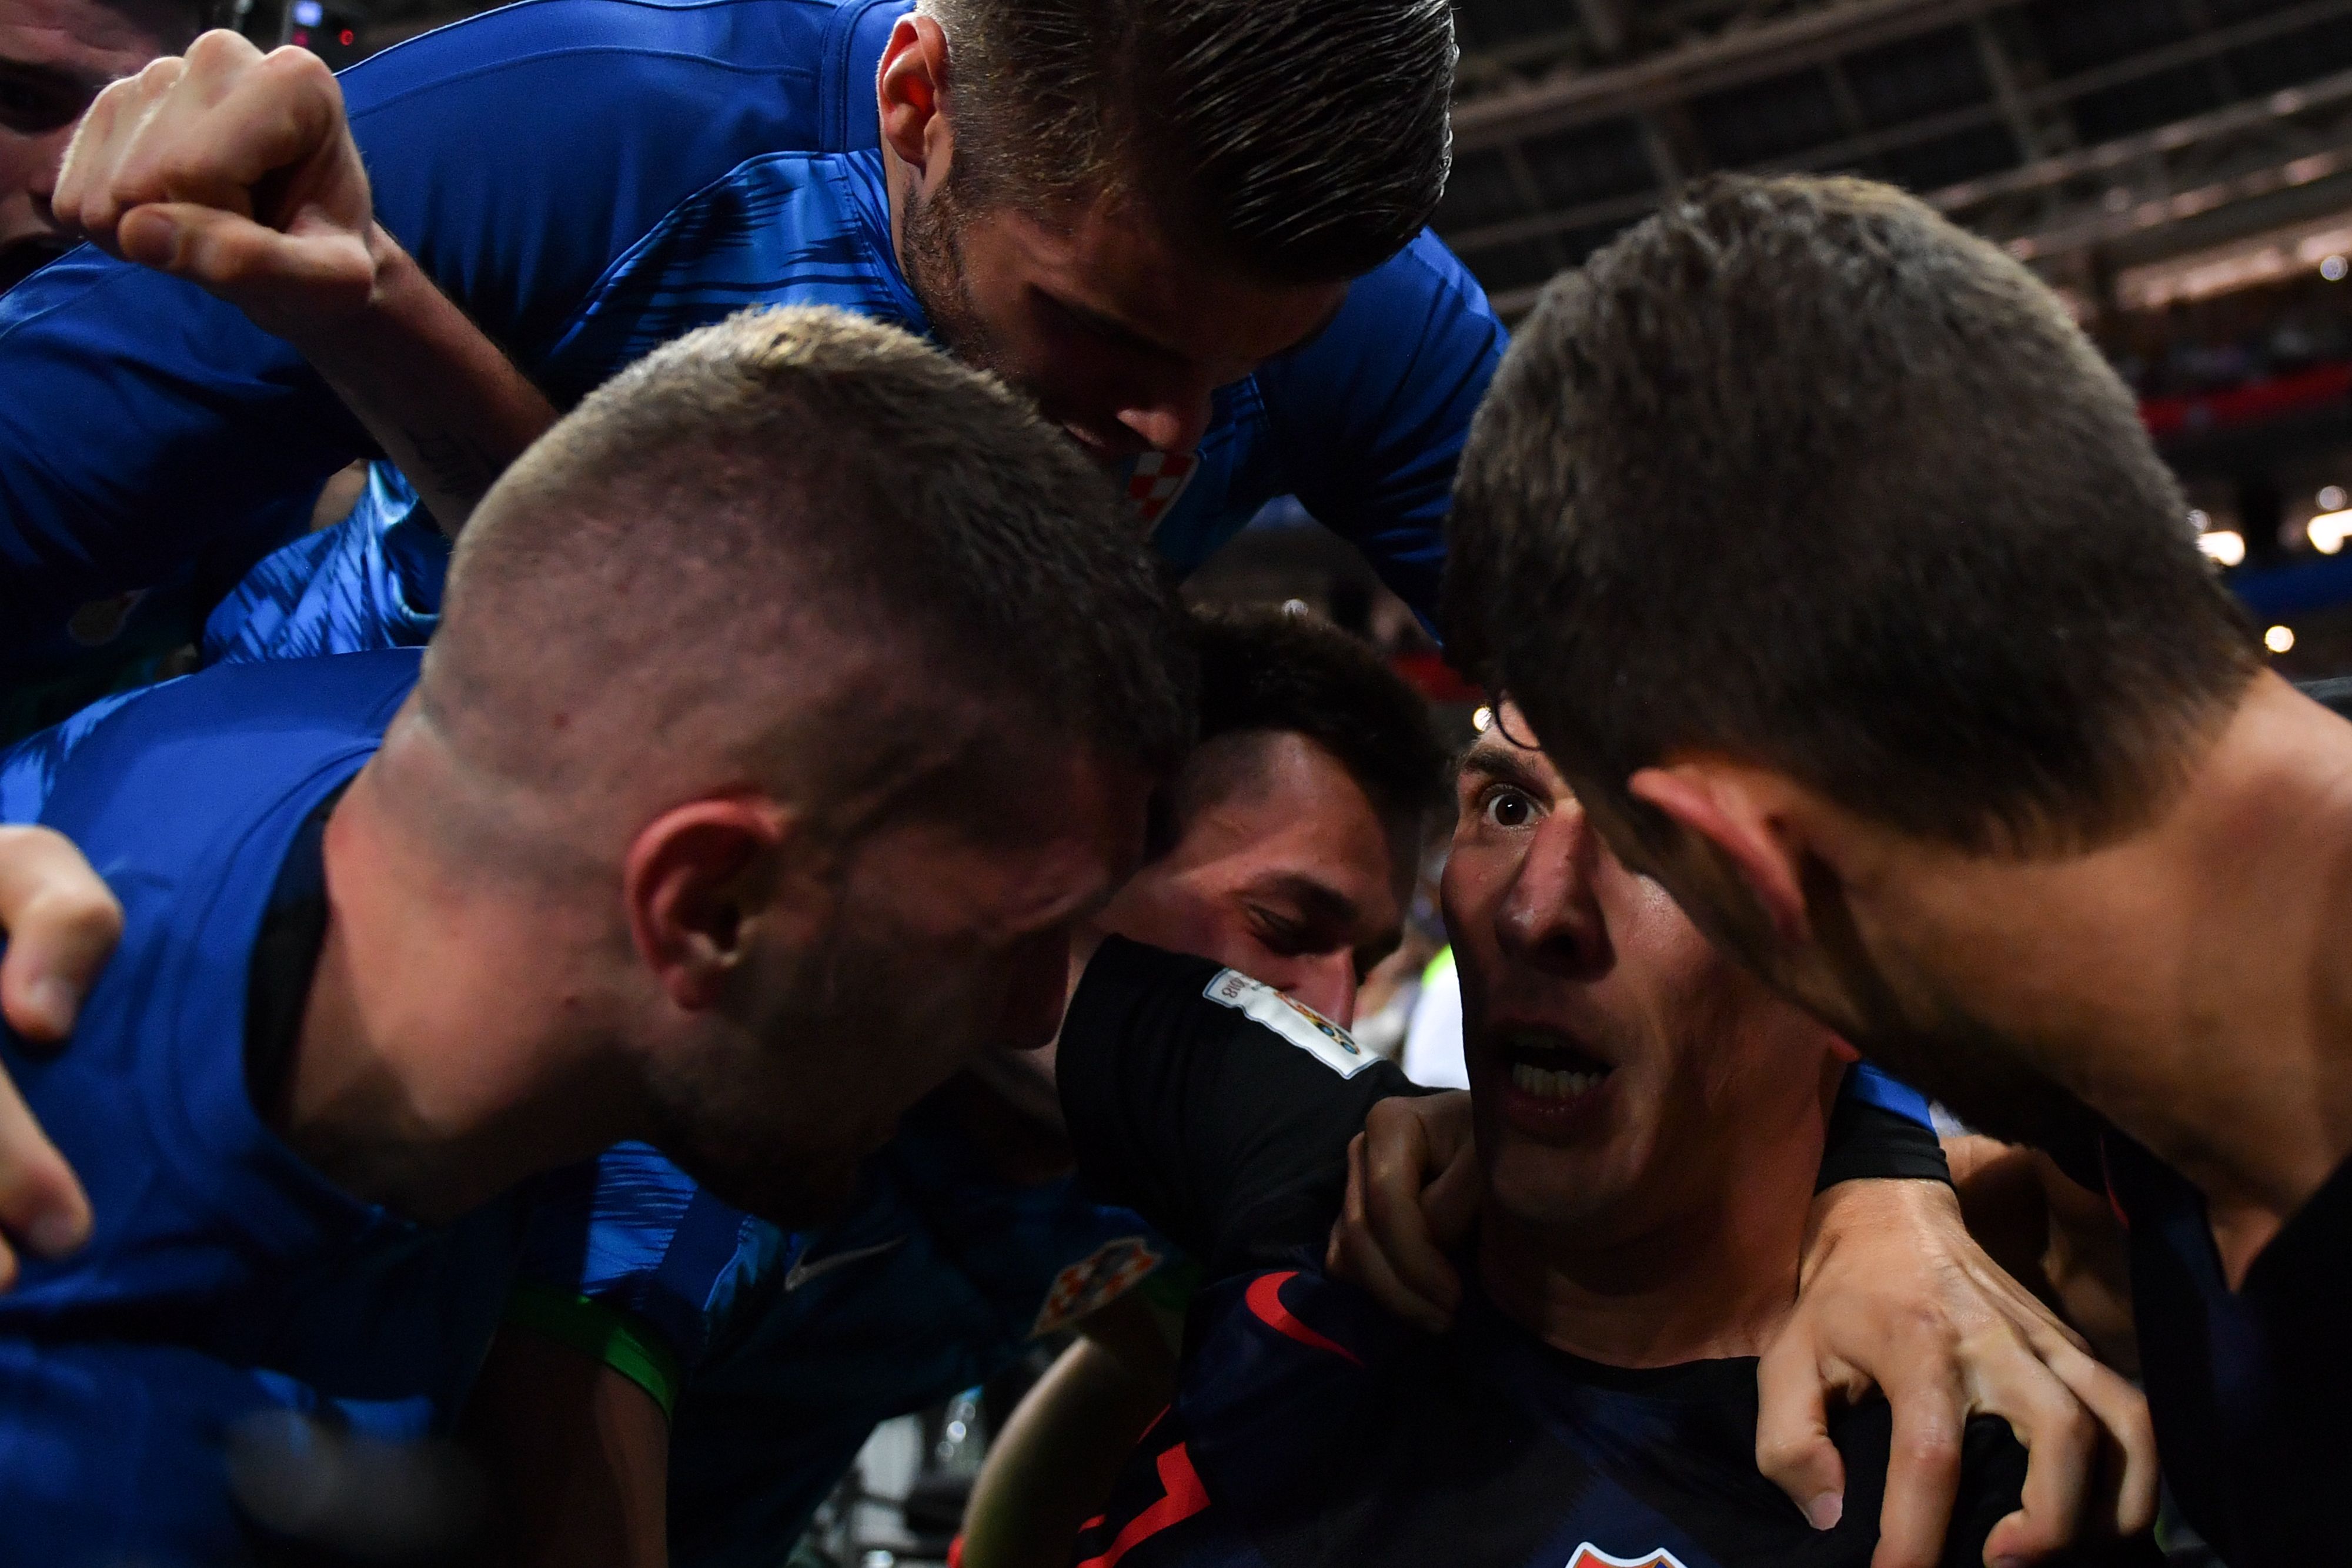 TOPSHOT - Croatia's forward Mario Mandzukic (C) celebrates with teammates after scoring his team's second goal during the Russia 2018 World Cup semi-final football match between Croatia and England at the Luzhniki Stadium in Moscow on July 11, 2018.